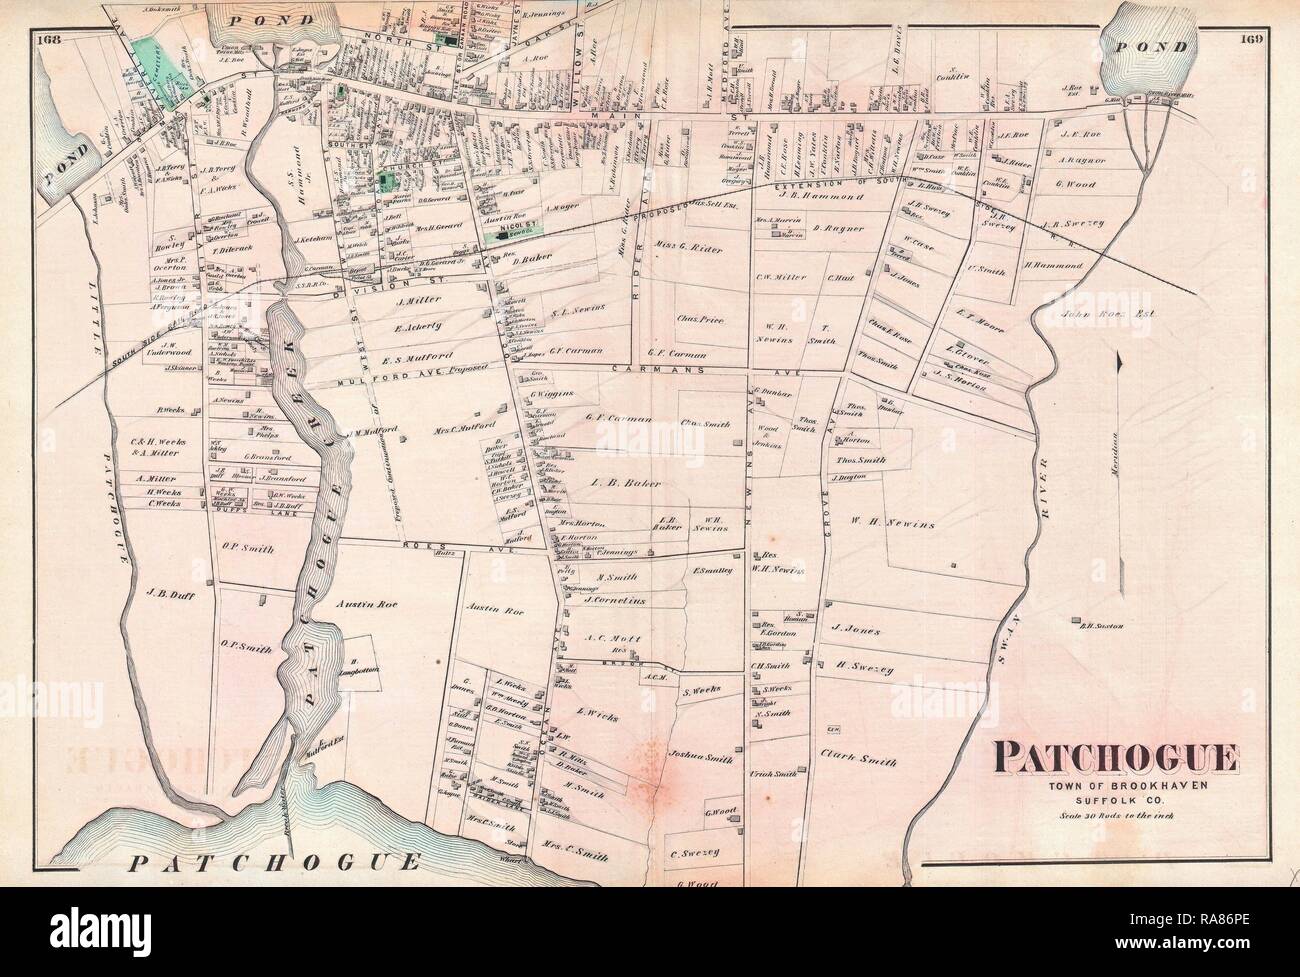 1873 Beers Map Of Patchogue Long Island New York Reimagined By Gibon Classic Art With A Modern Twist Reimagined RA86PE 